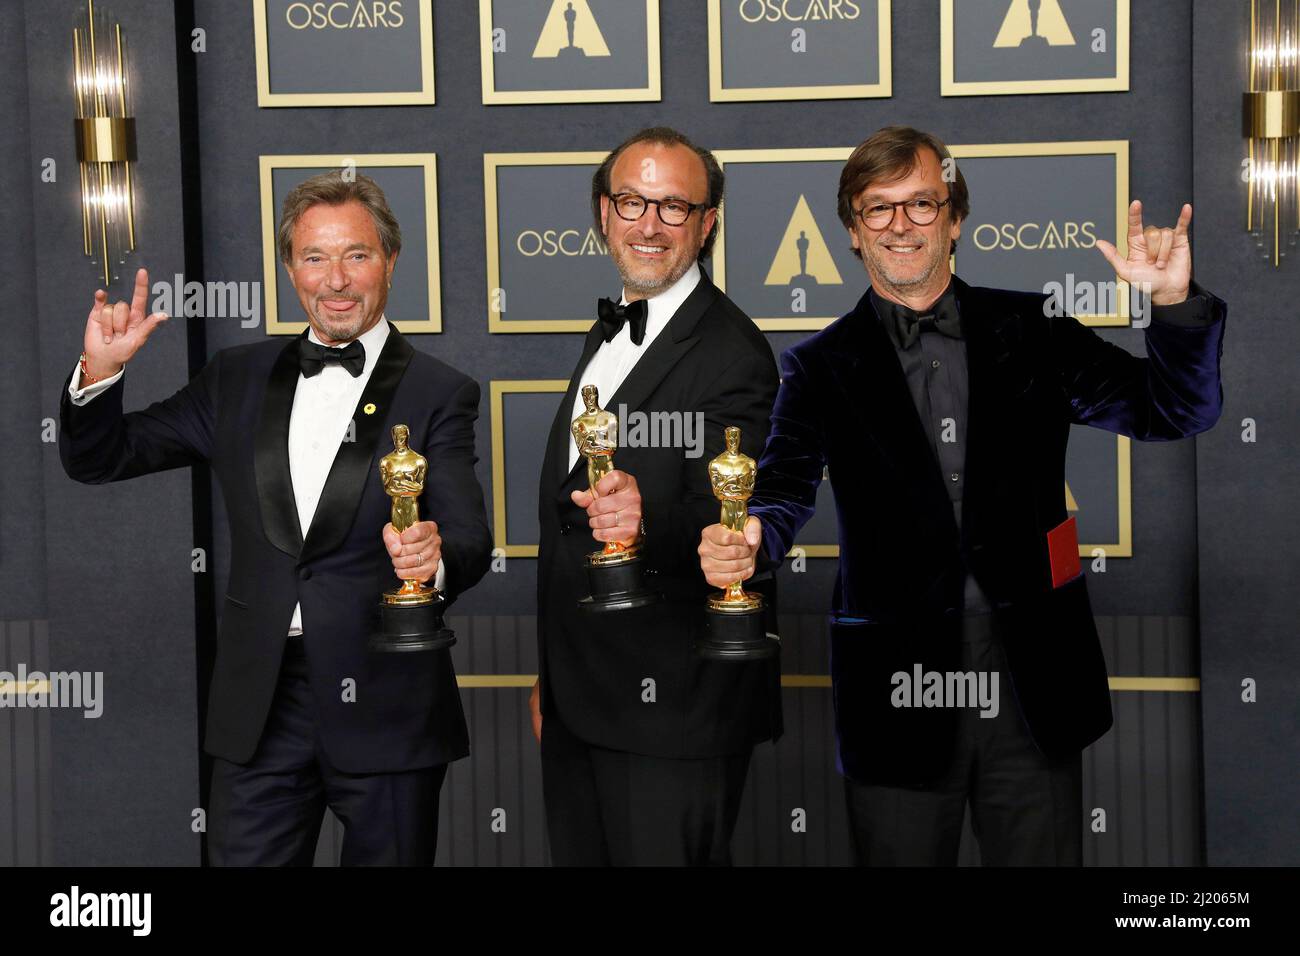 Los Angeles, CA. 27th Mar, 2022. Best Picture, CODA, Philippe Rousselet, Fabrice Gianfermi, Patrick Wachsberger in the press room for 94th Academy Awards - Press Room, Dolby Theatre, Los Angeles, CA March 27, 2022. Credit: Priscilla Grant/Everett Collection/Alamy Live News Stock Photo